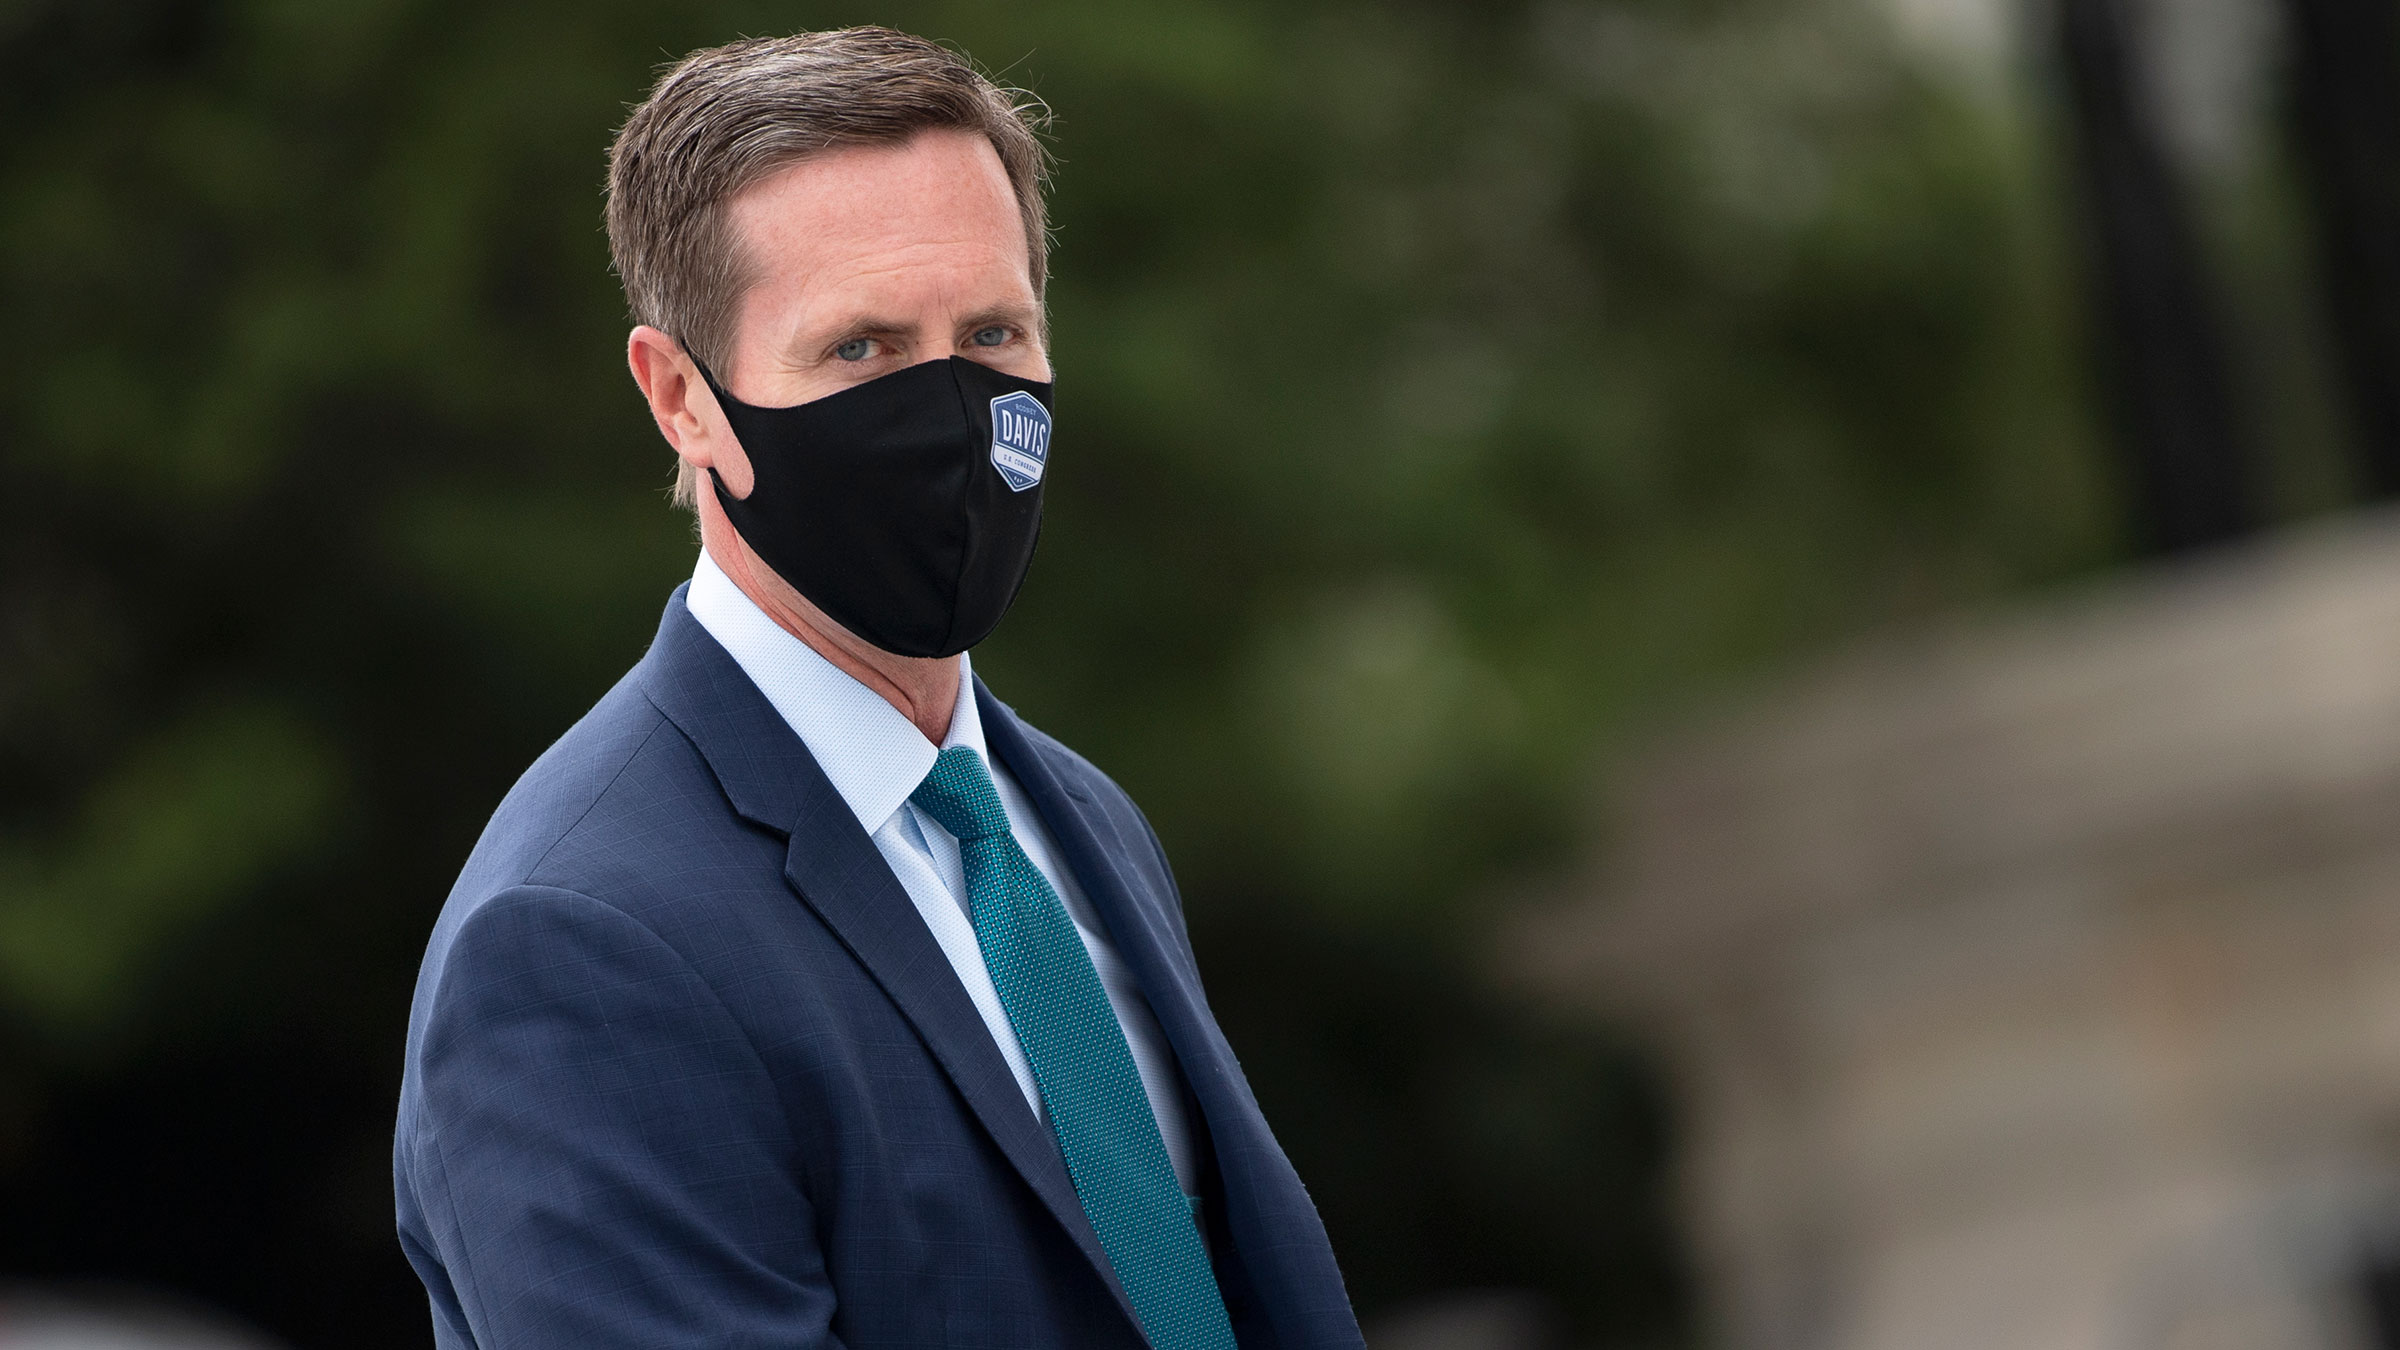 Rep. Rodney Davis walks to the Capitol for a vote on September 17 in Washington, DC.